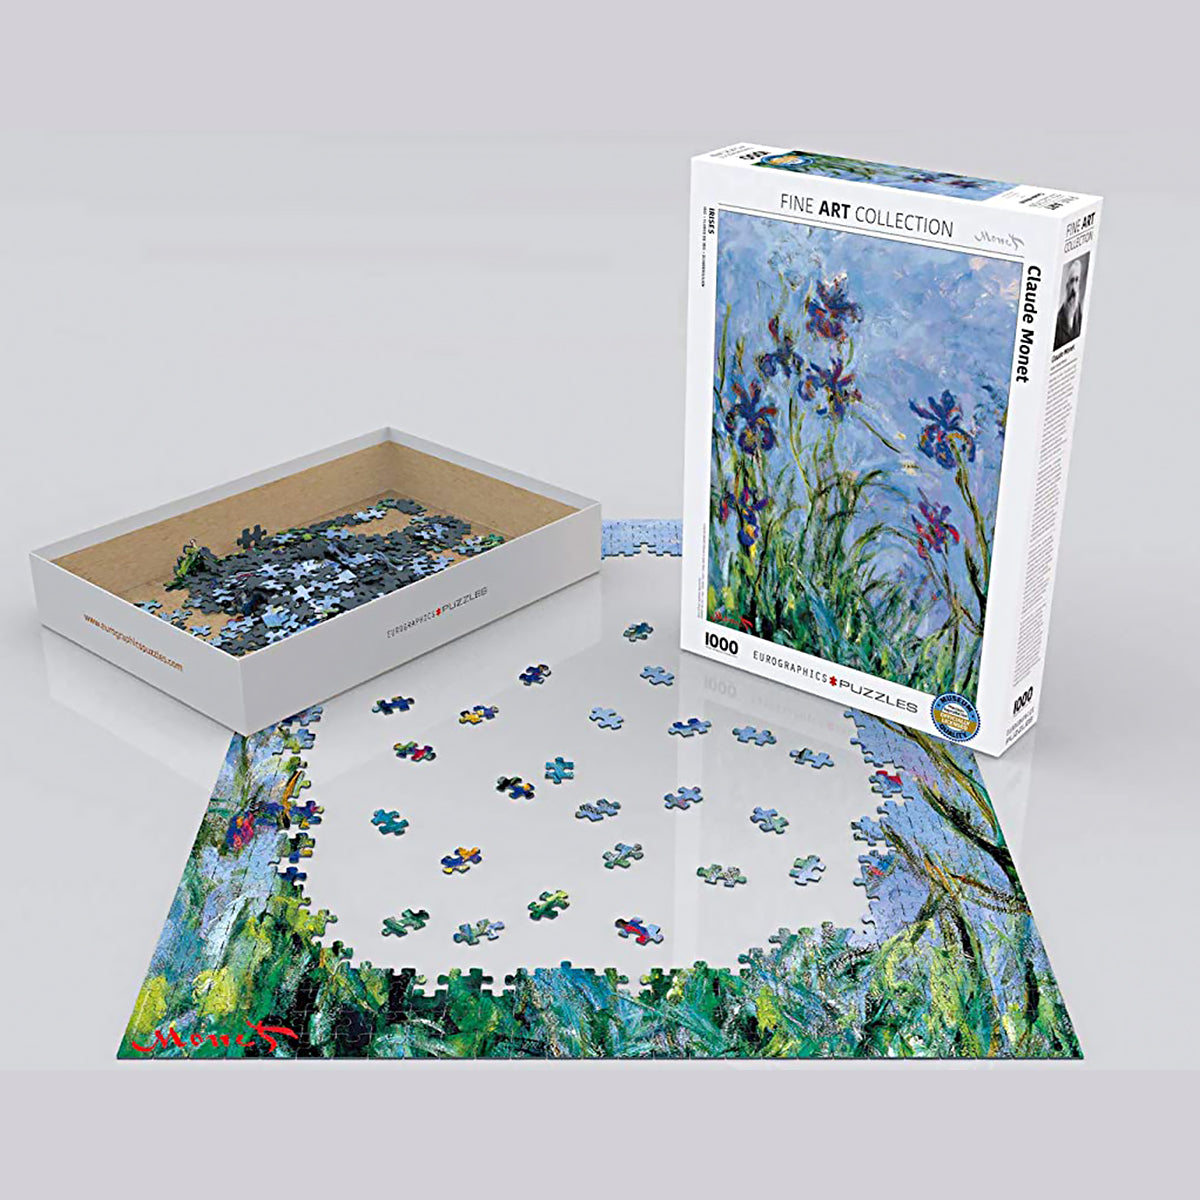 Piece Together EuroGraphics Fine Art Collection of Monet's 'Iris Mauves' Jigsaw Puzzle for a Beautiful Wall Art Display